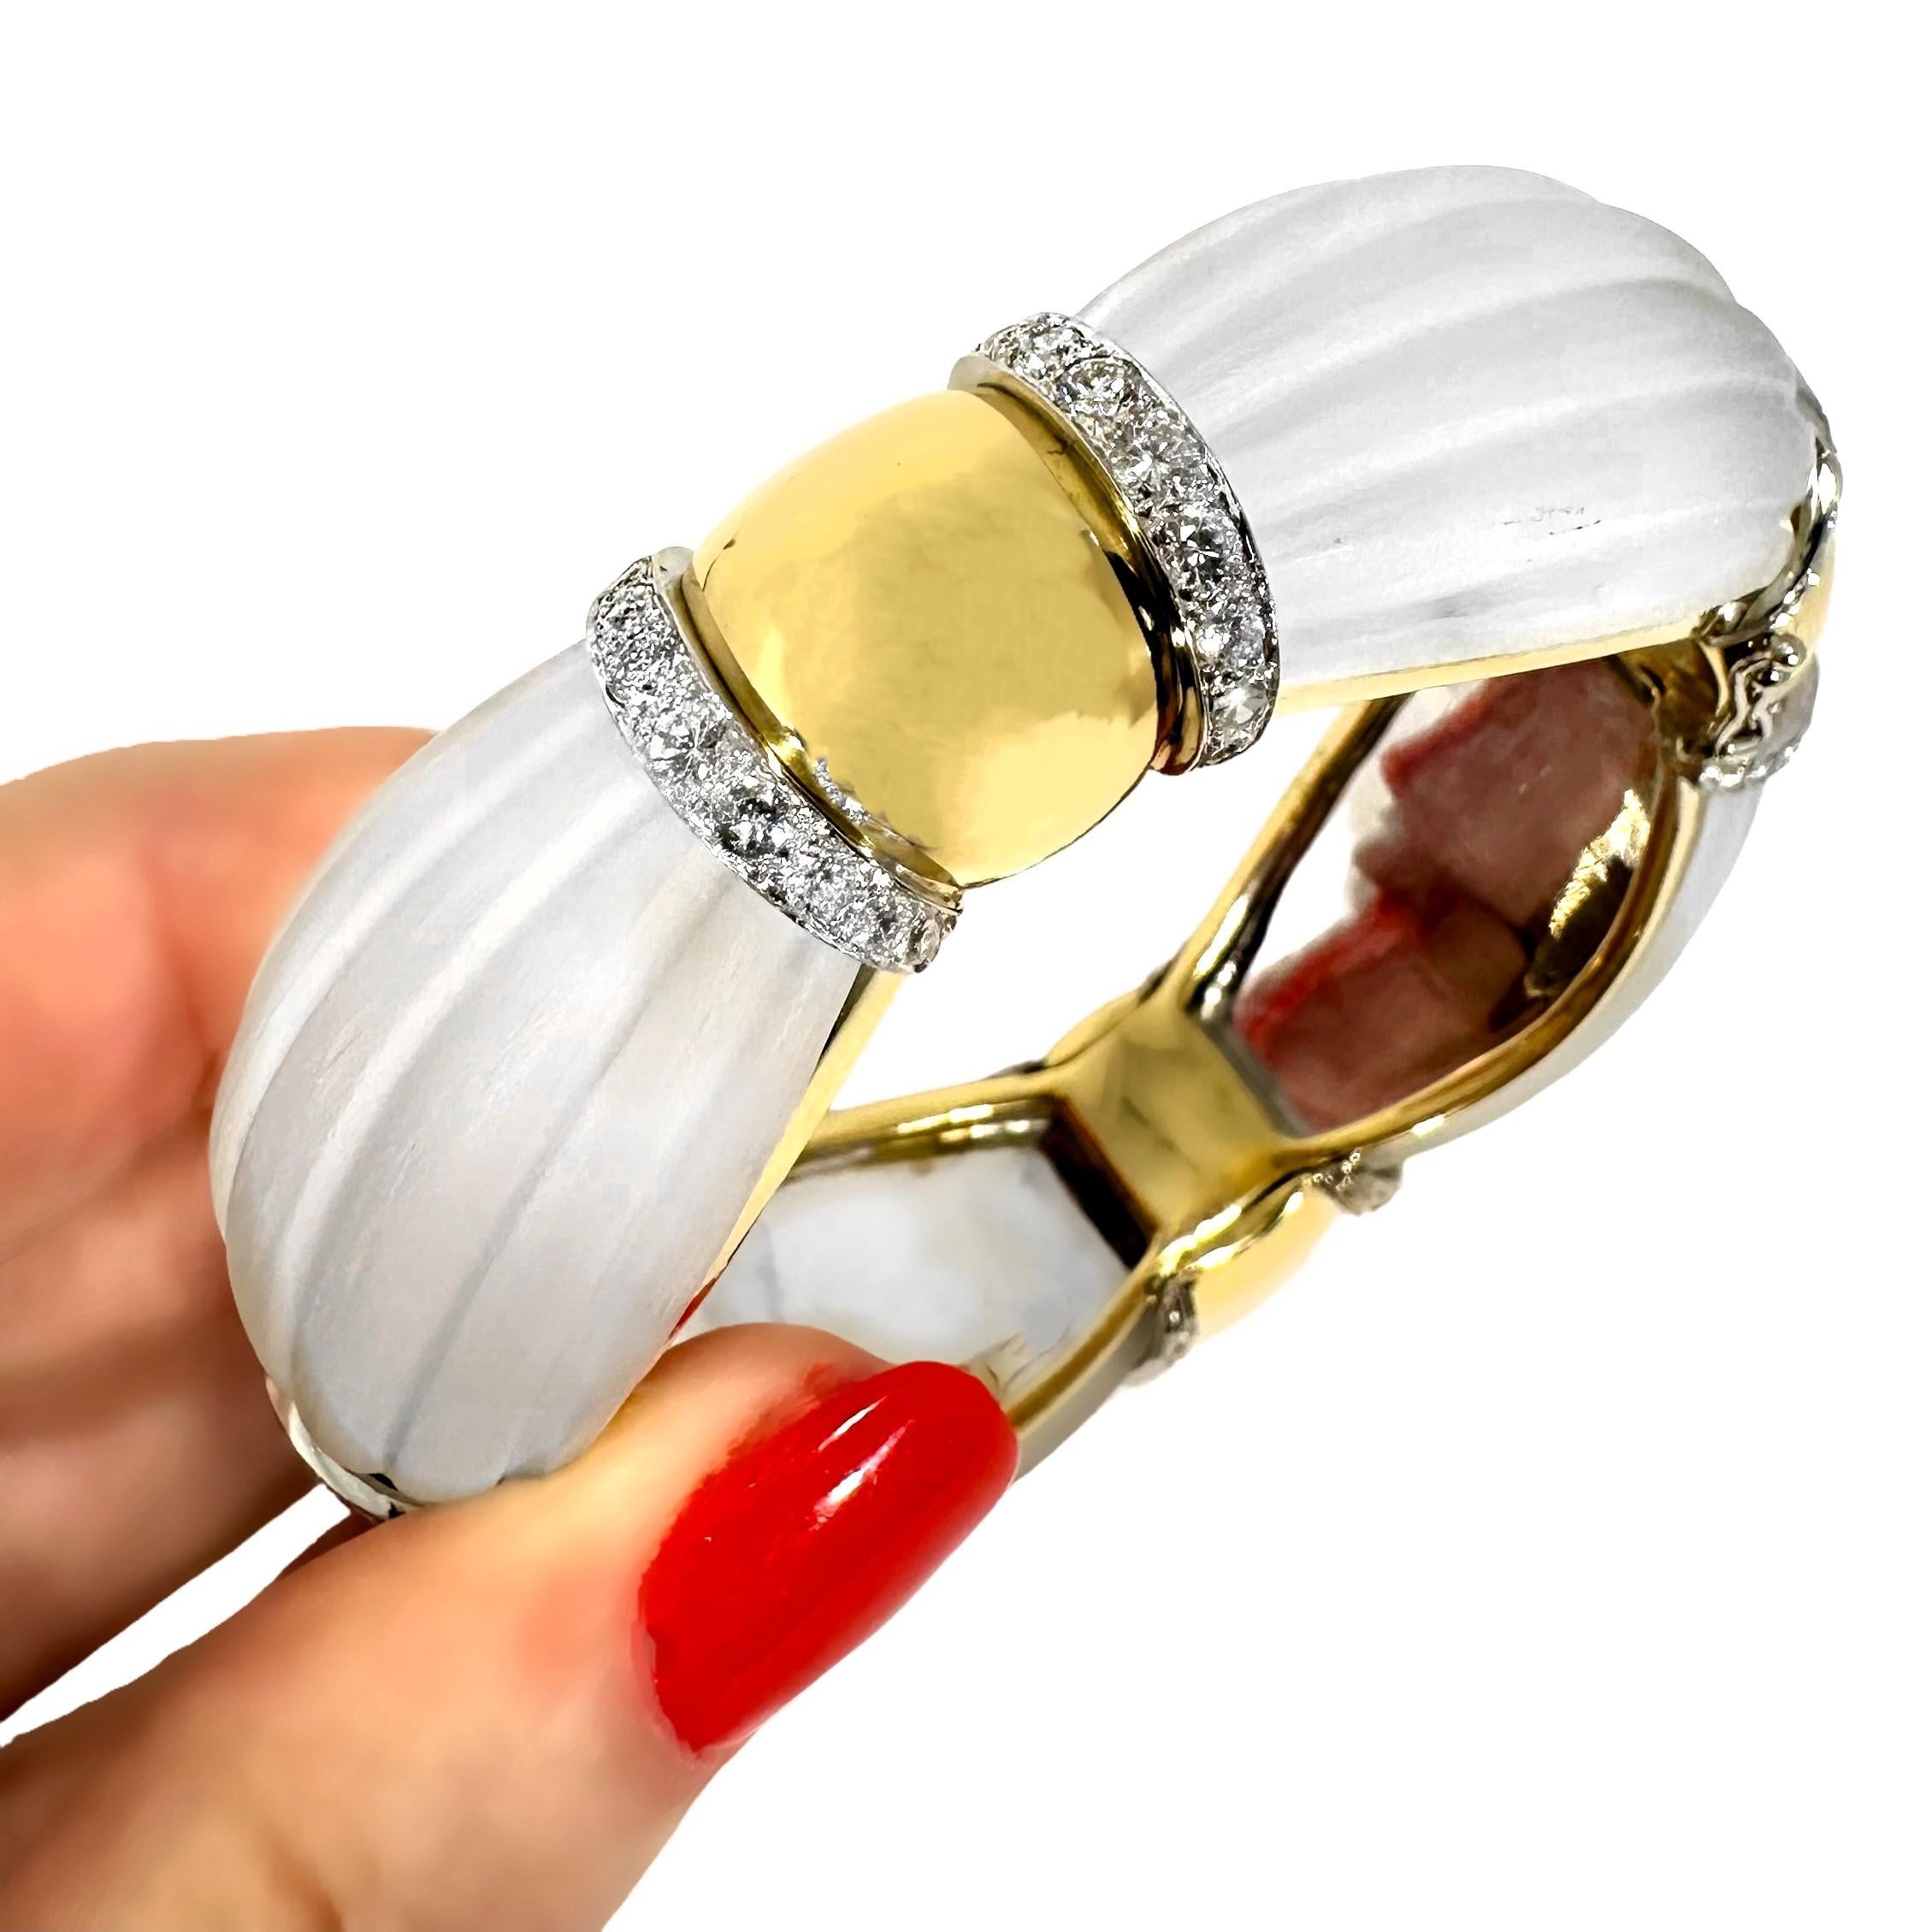 Tailored Mid-20th Century 18k Gold Bangle with Frosted Rock Crystal and Diamonds For Sale 4